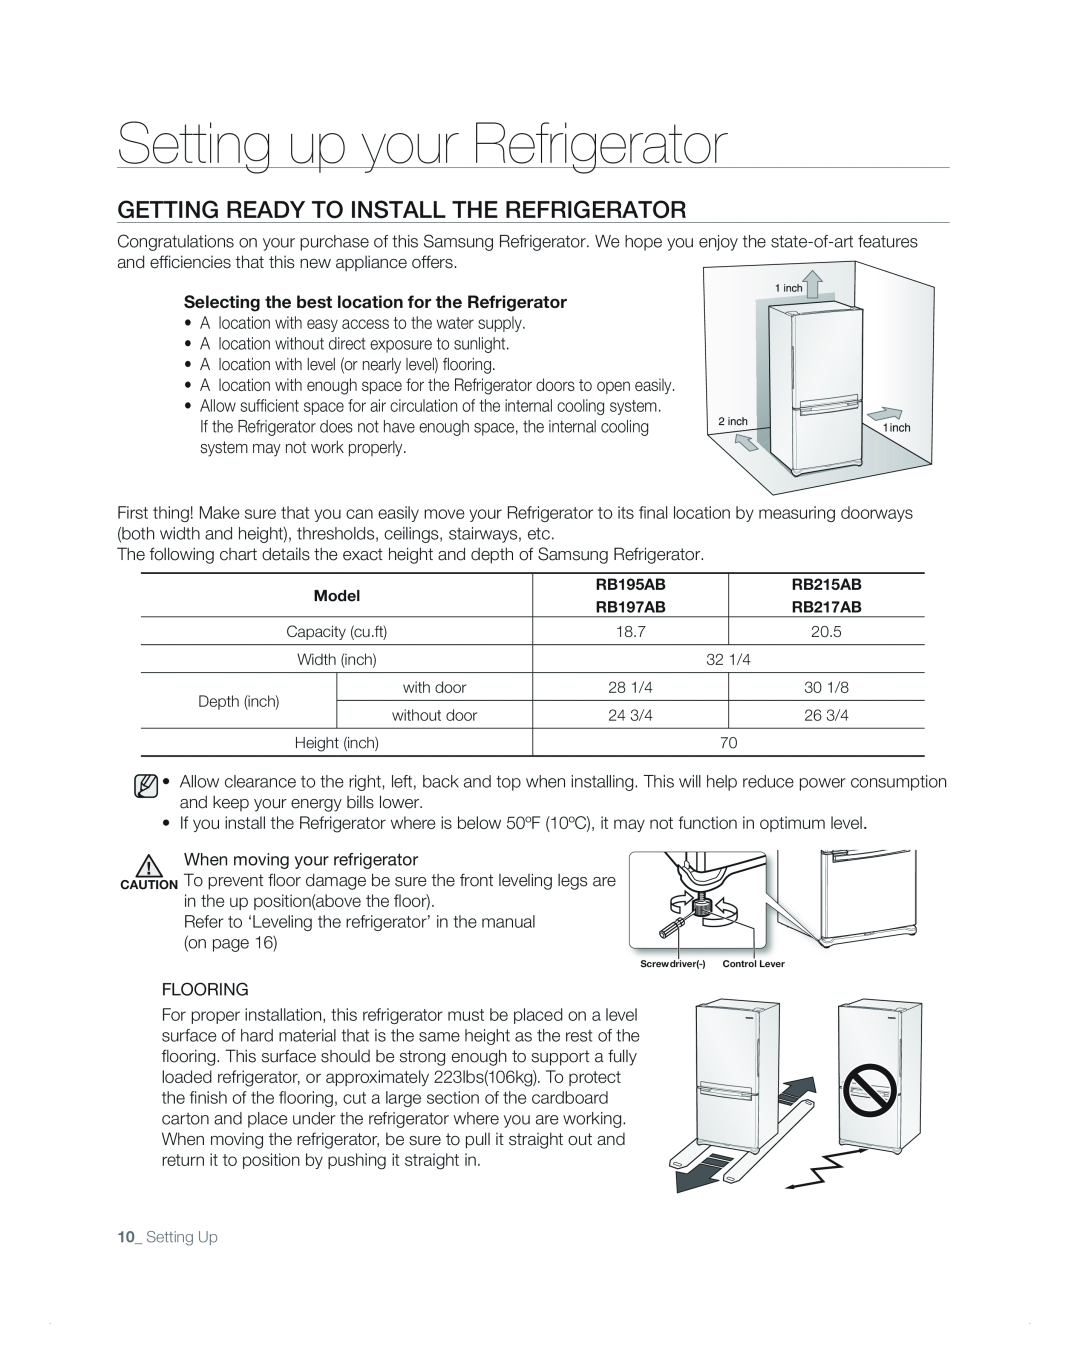 Samsung RB215AB, RB217AB, RB197AB, RB195AB user manual Setting up your Refrigerator, GEttinG READy to instALL tHE REFRiGERAtoR 